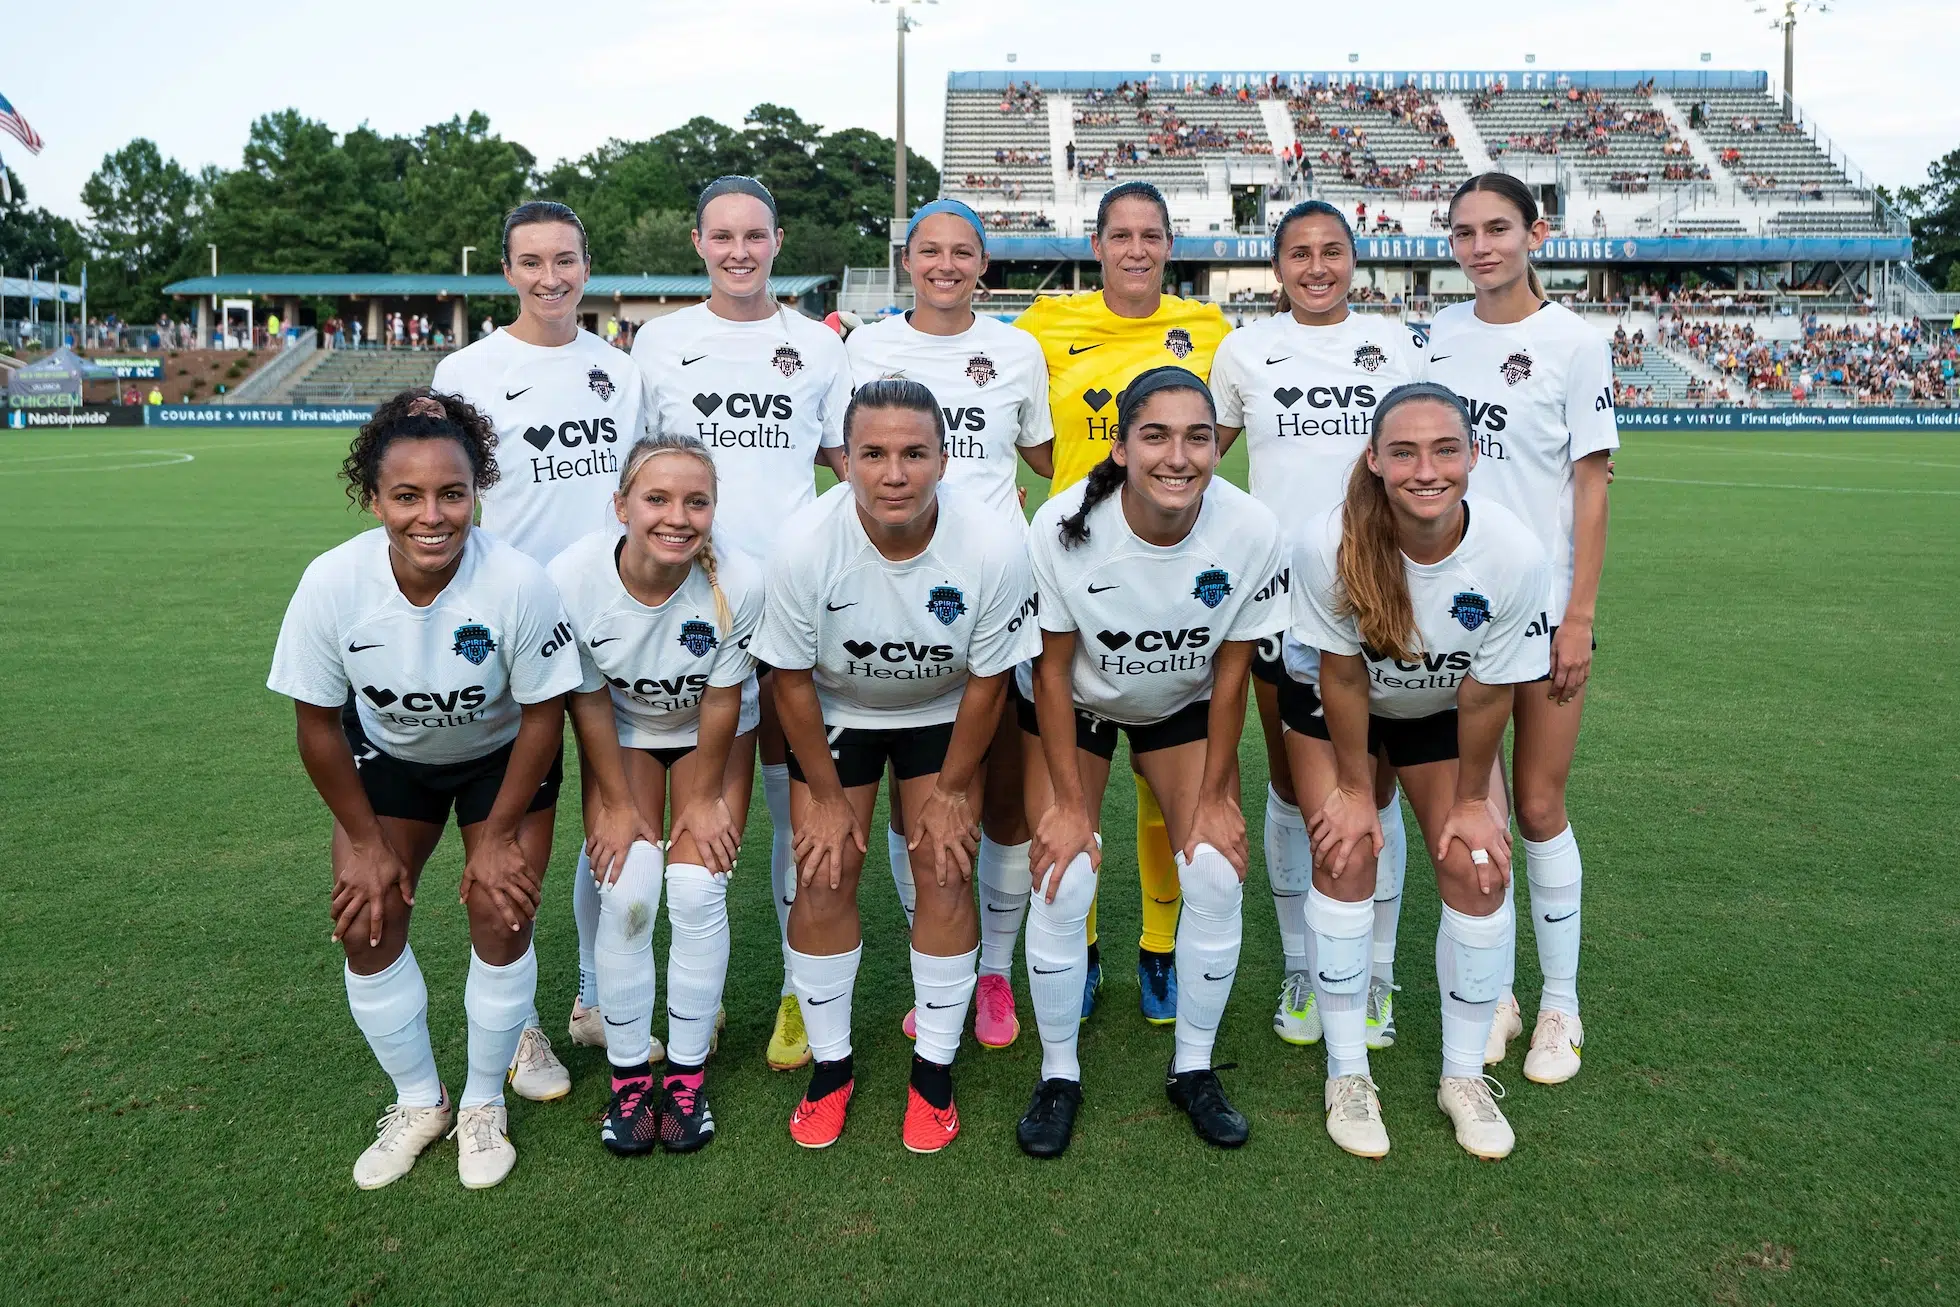 Ten soccer players in white uniforms and one in a yellow uniform pose for a photo in two rows.